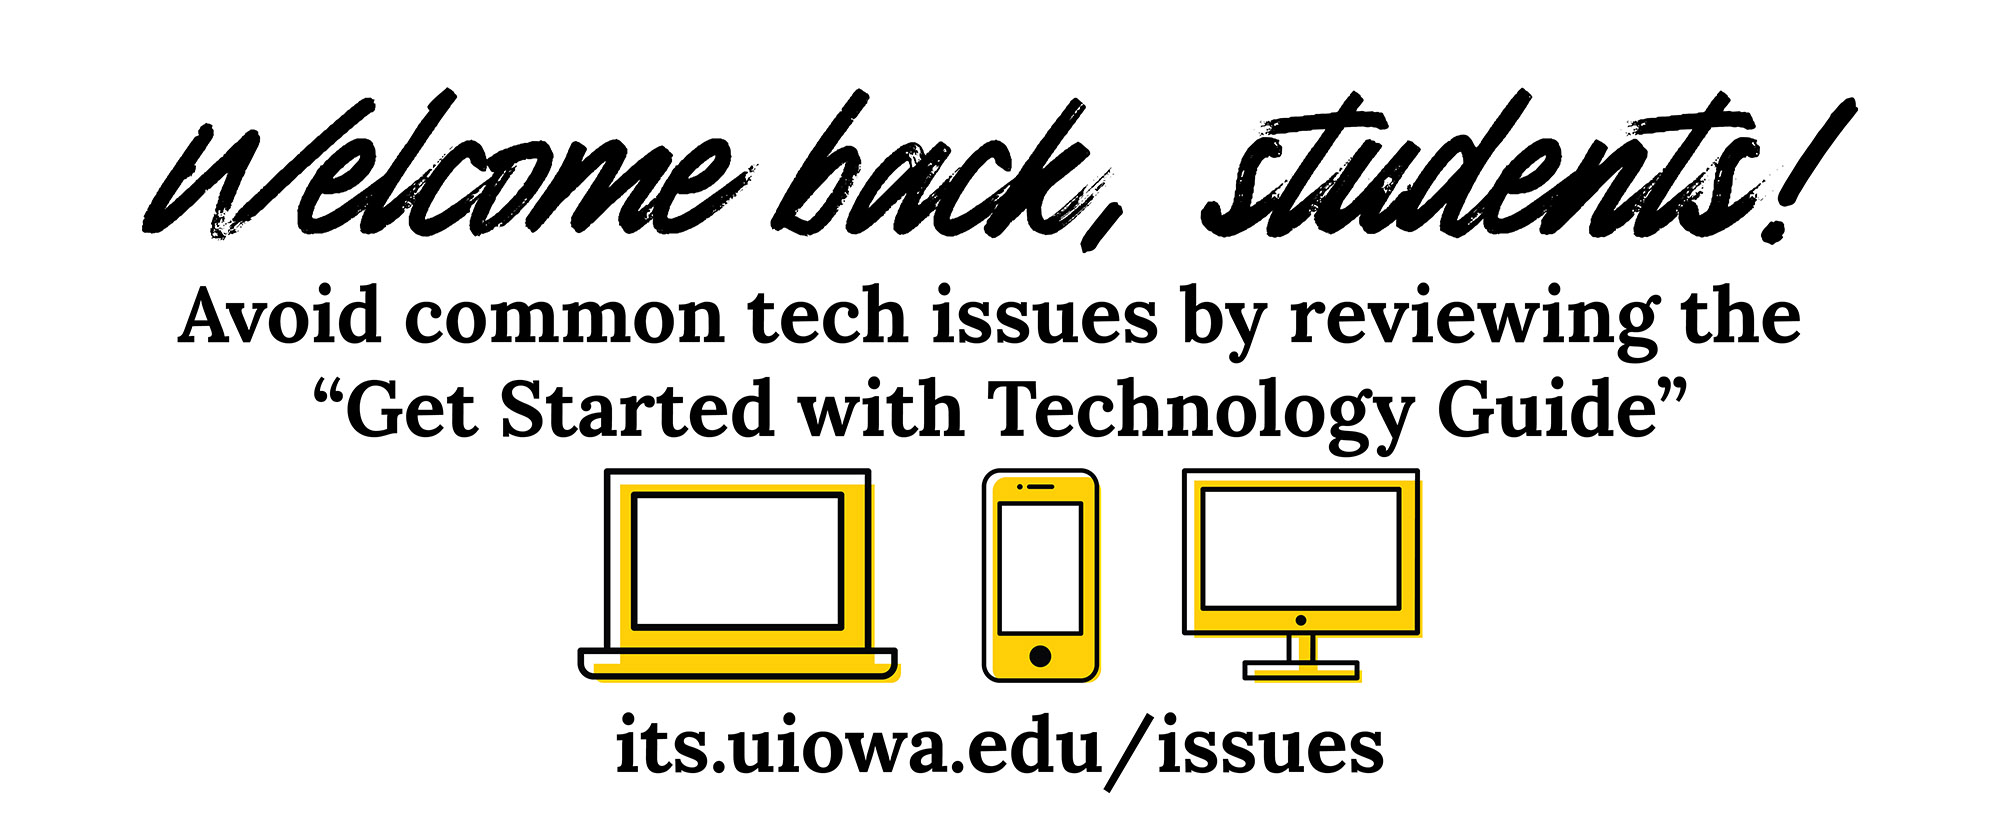 Avoid common tech issues by reviewing its.uiowa.edu/issues